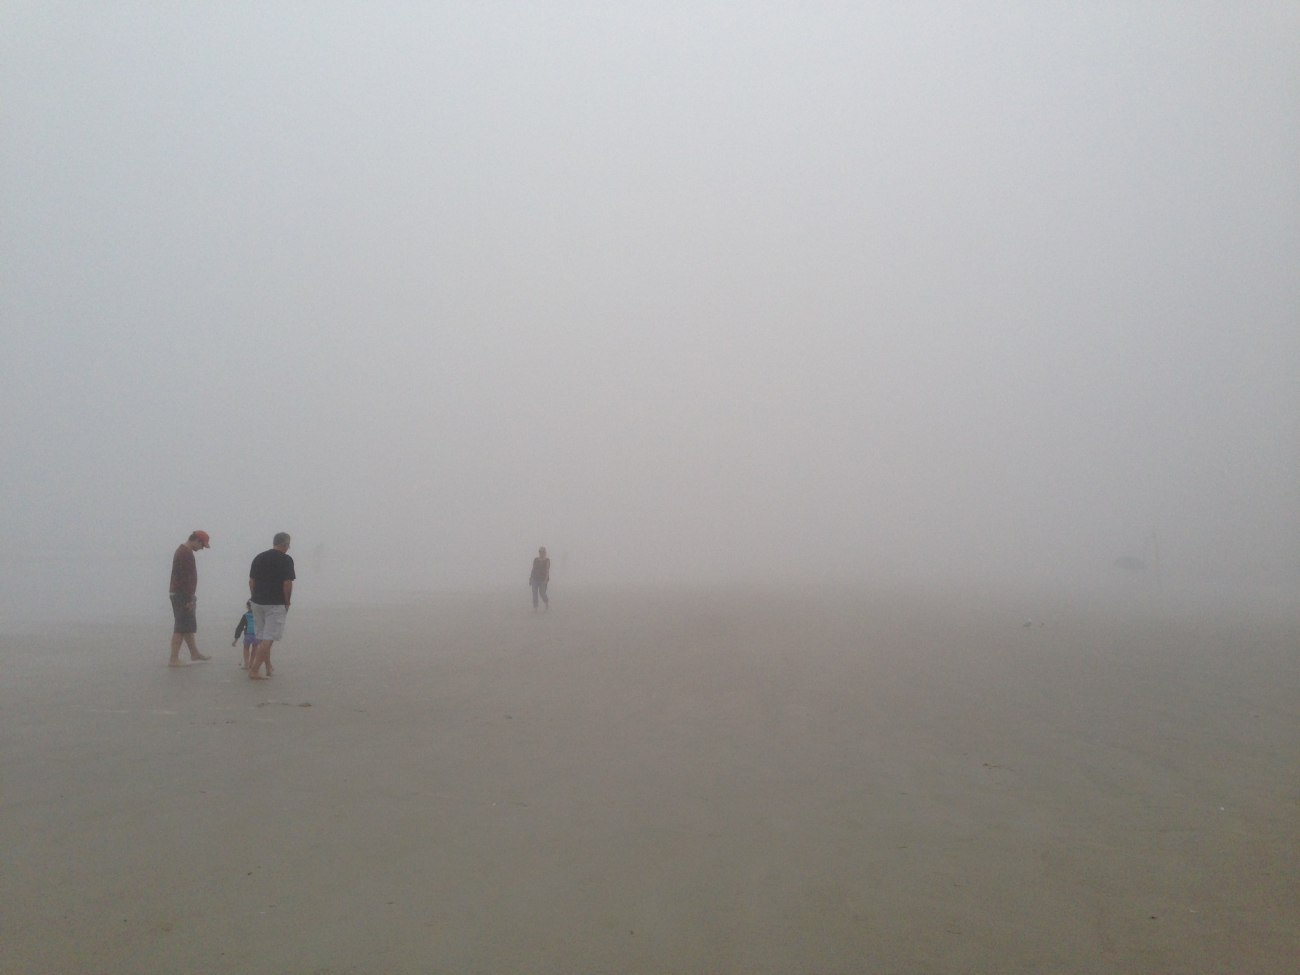 Ocean fog thick as split pea soup as the old adage goes greets morningwalkers on the beach in New Smyrna Beach, Florida